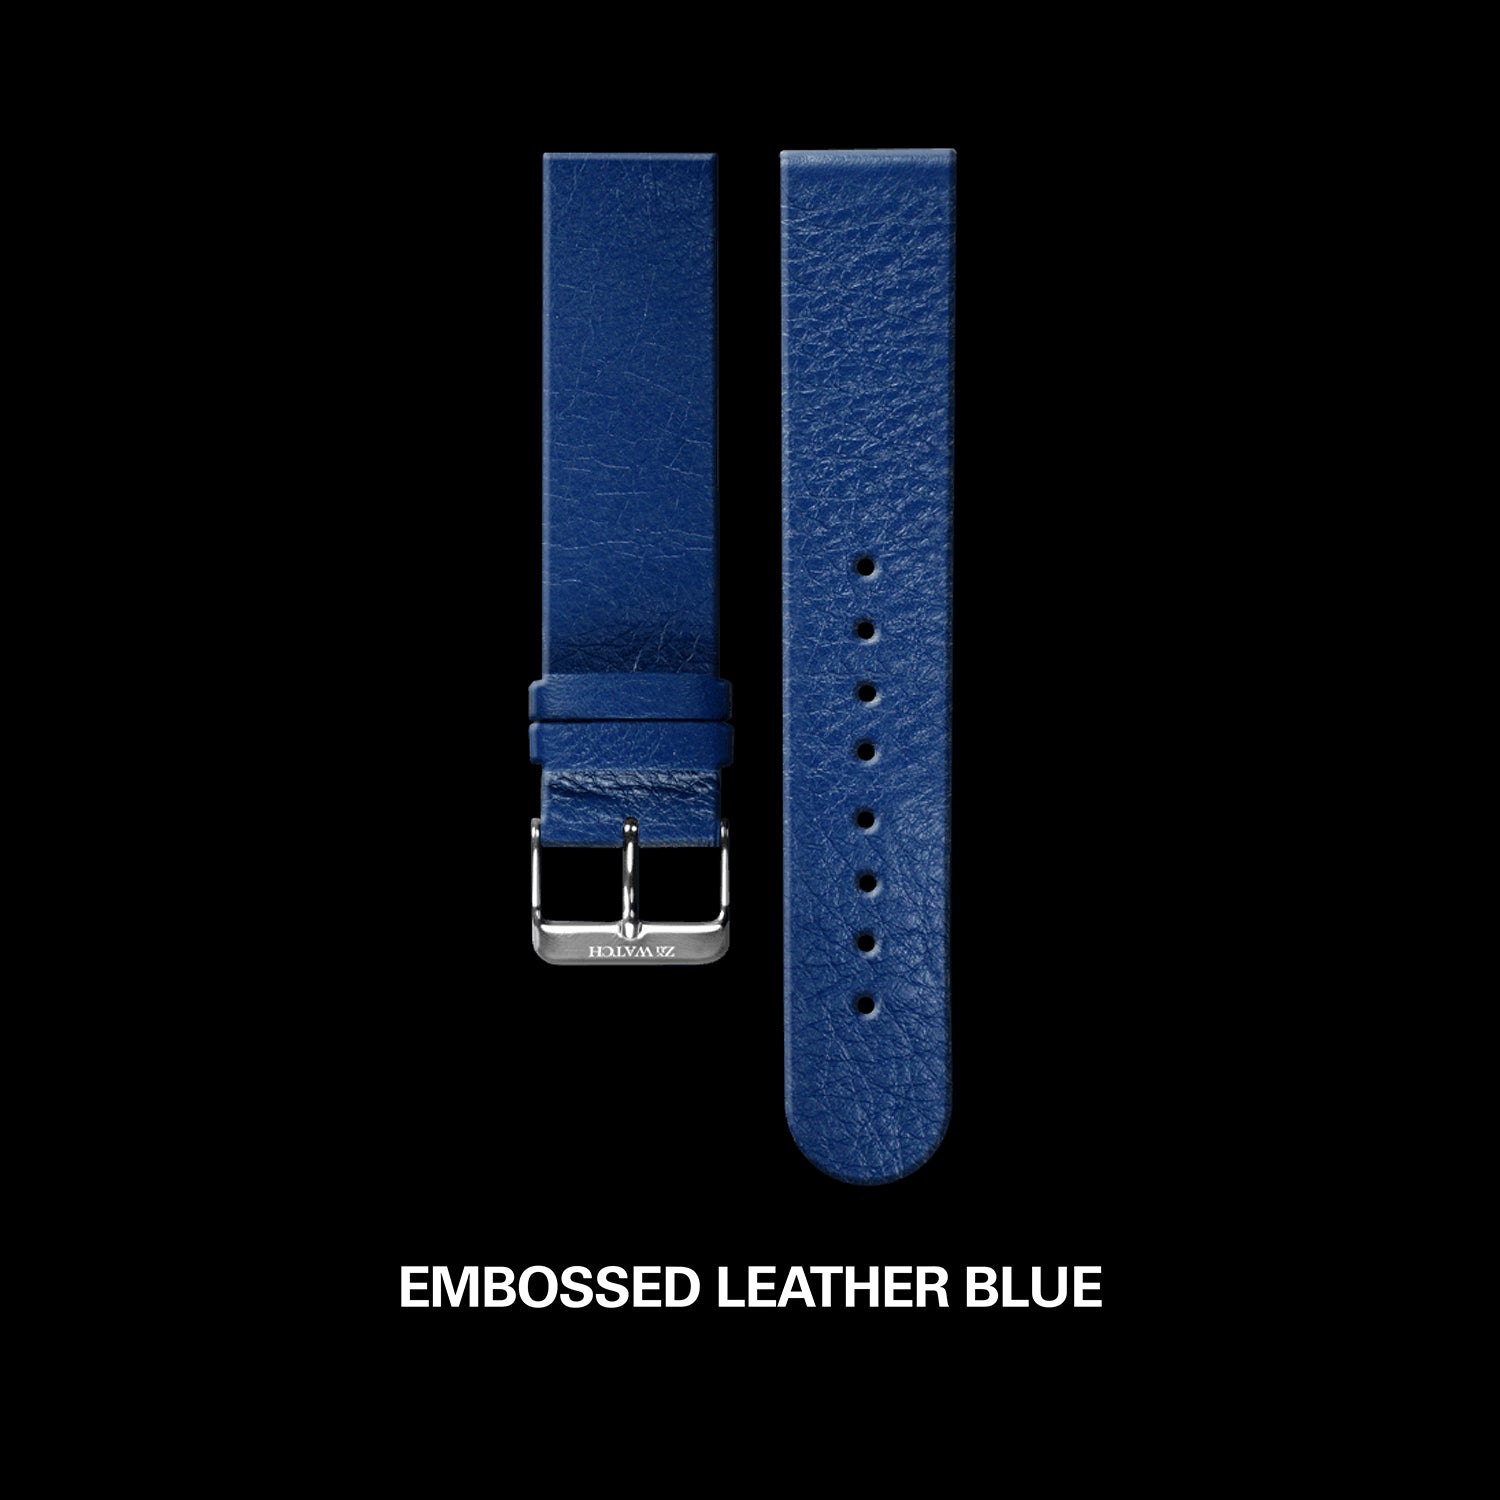 EMBOSSED LEATHER｜BLUE｜STRAP SERIES - yunivers hsieh